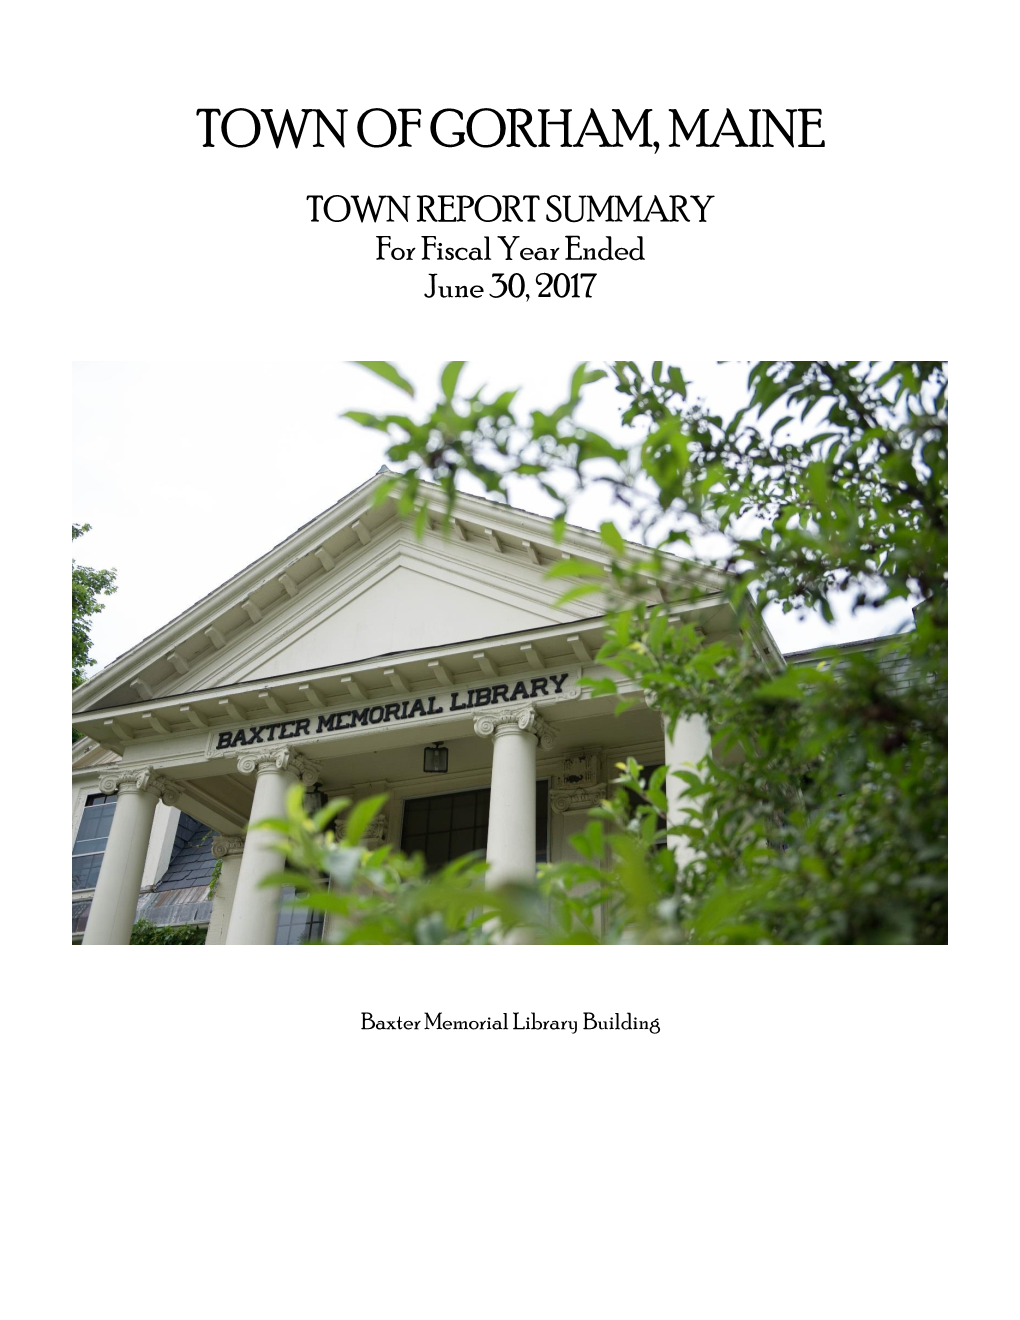 2016-17 Town Report